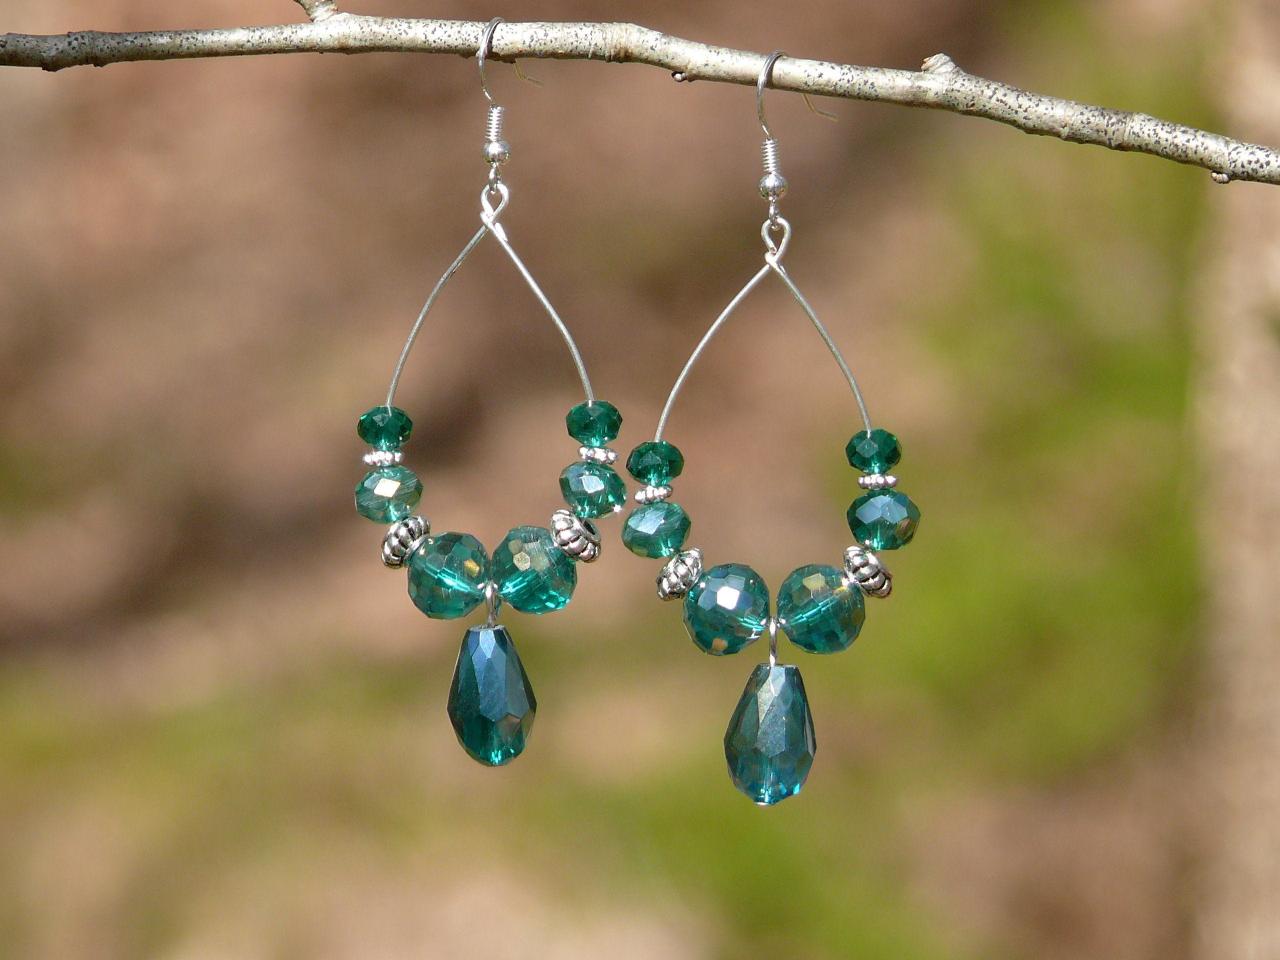 Sparkles Collection - Teal Boho Hoops With Drop, Bohemian Hoop Earrings, Blue Green Chandelier Earrings, Sparkly Gypsy Earrings,gift For Her